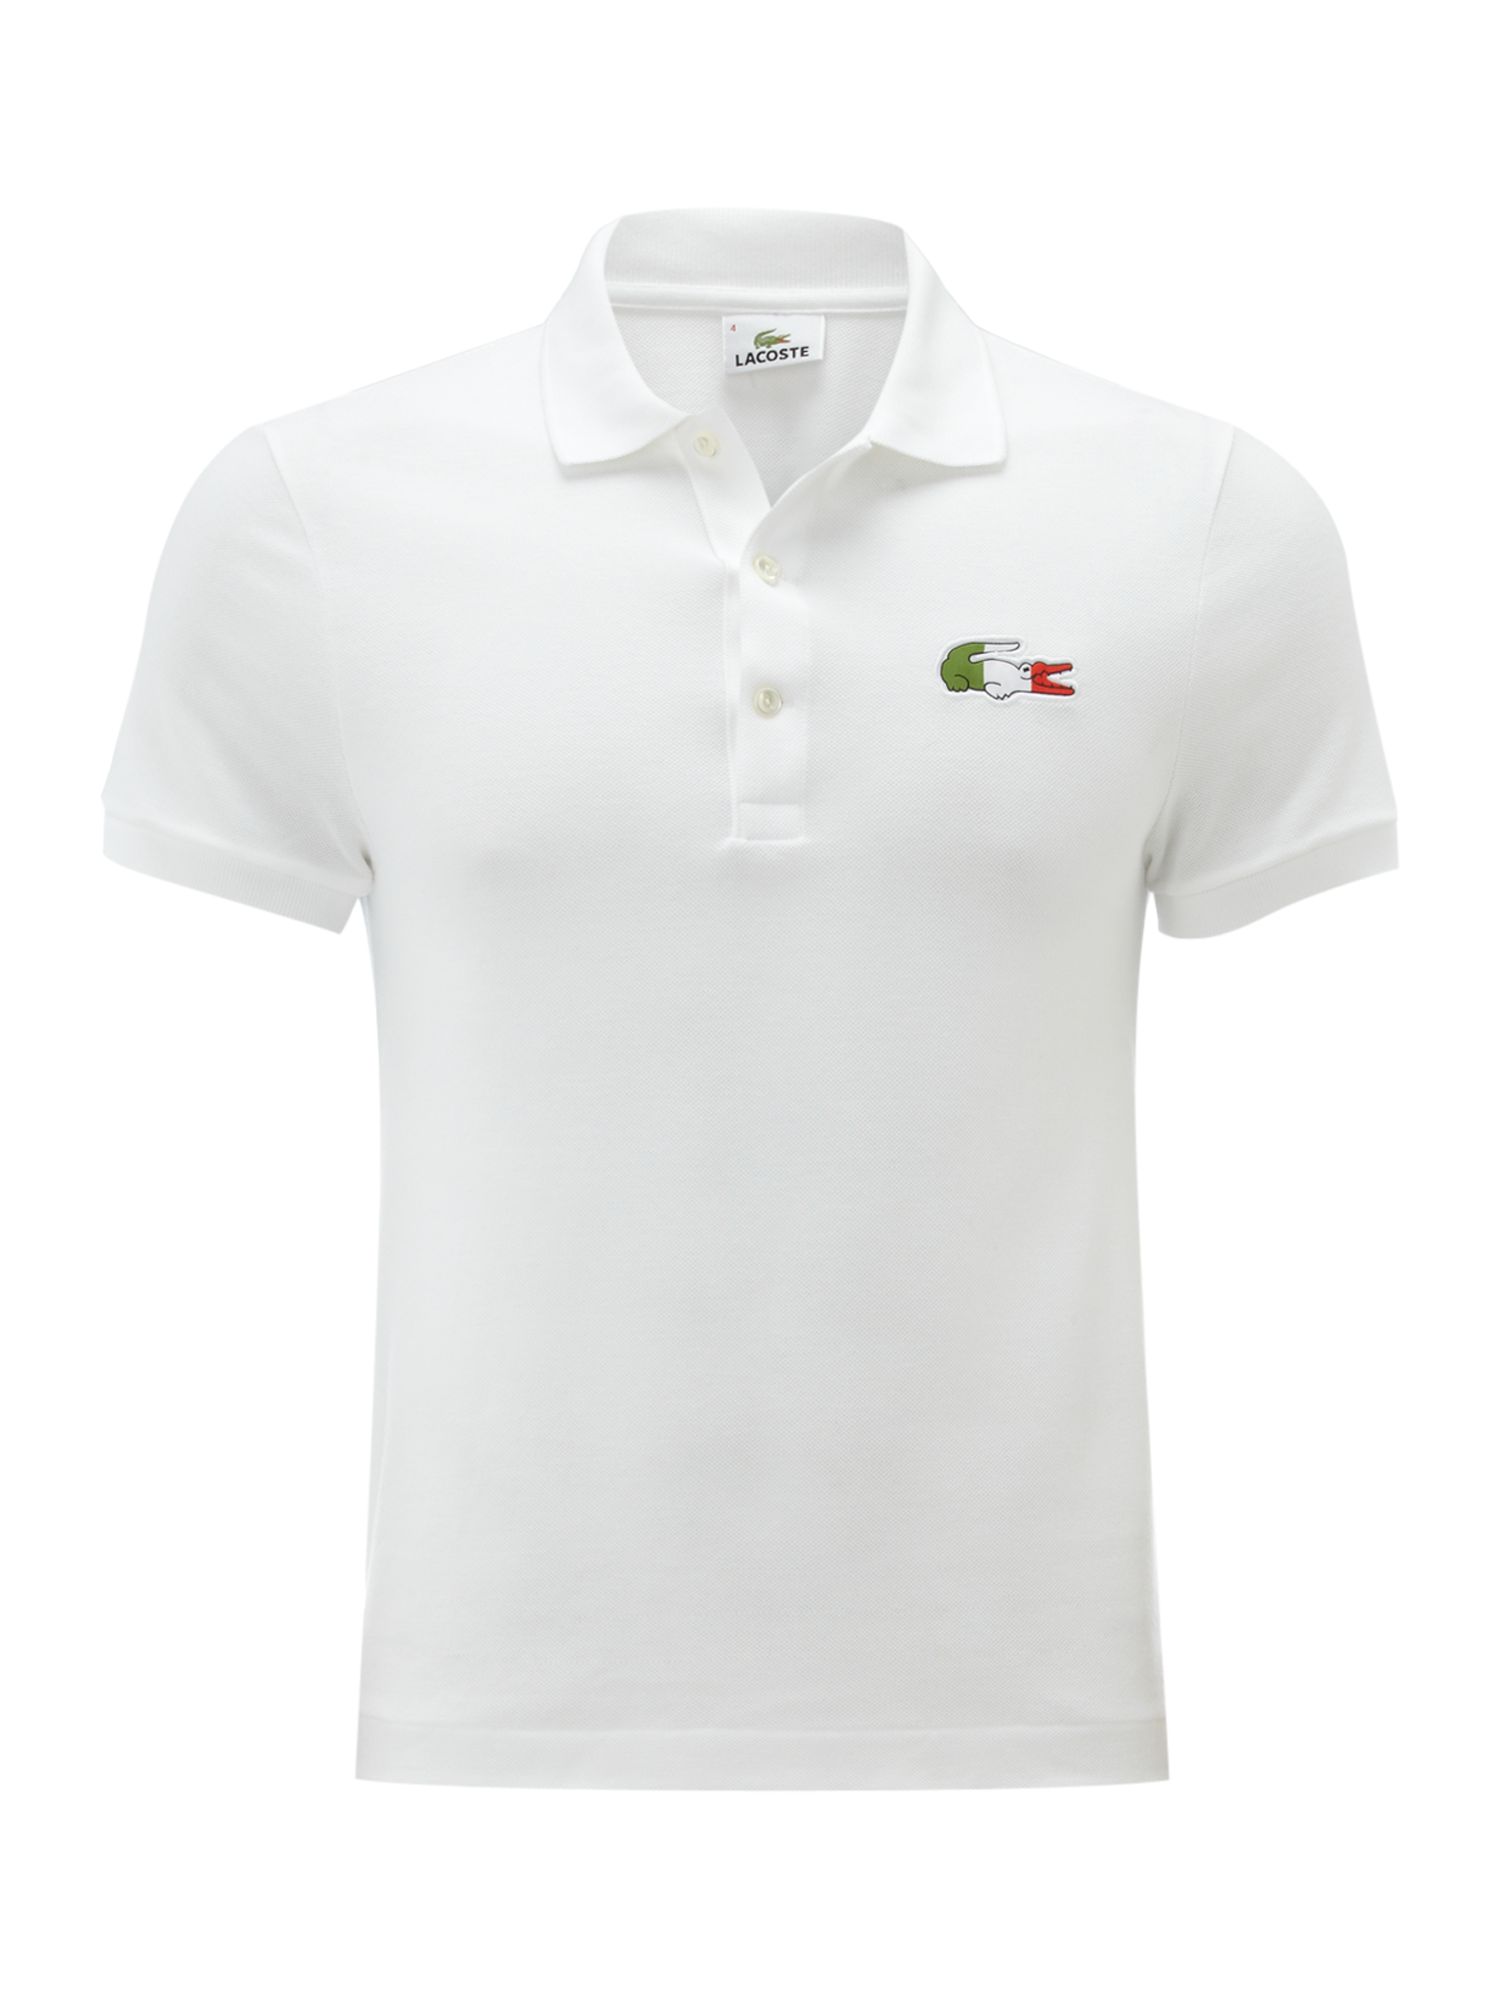 Lacoste Slim Fit Italy Croc Polo Shirt in White for Men | Lyst